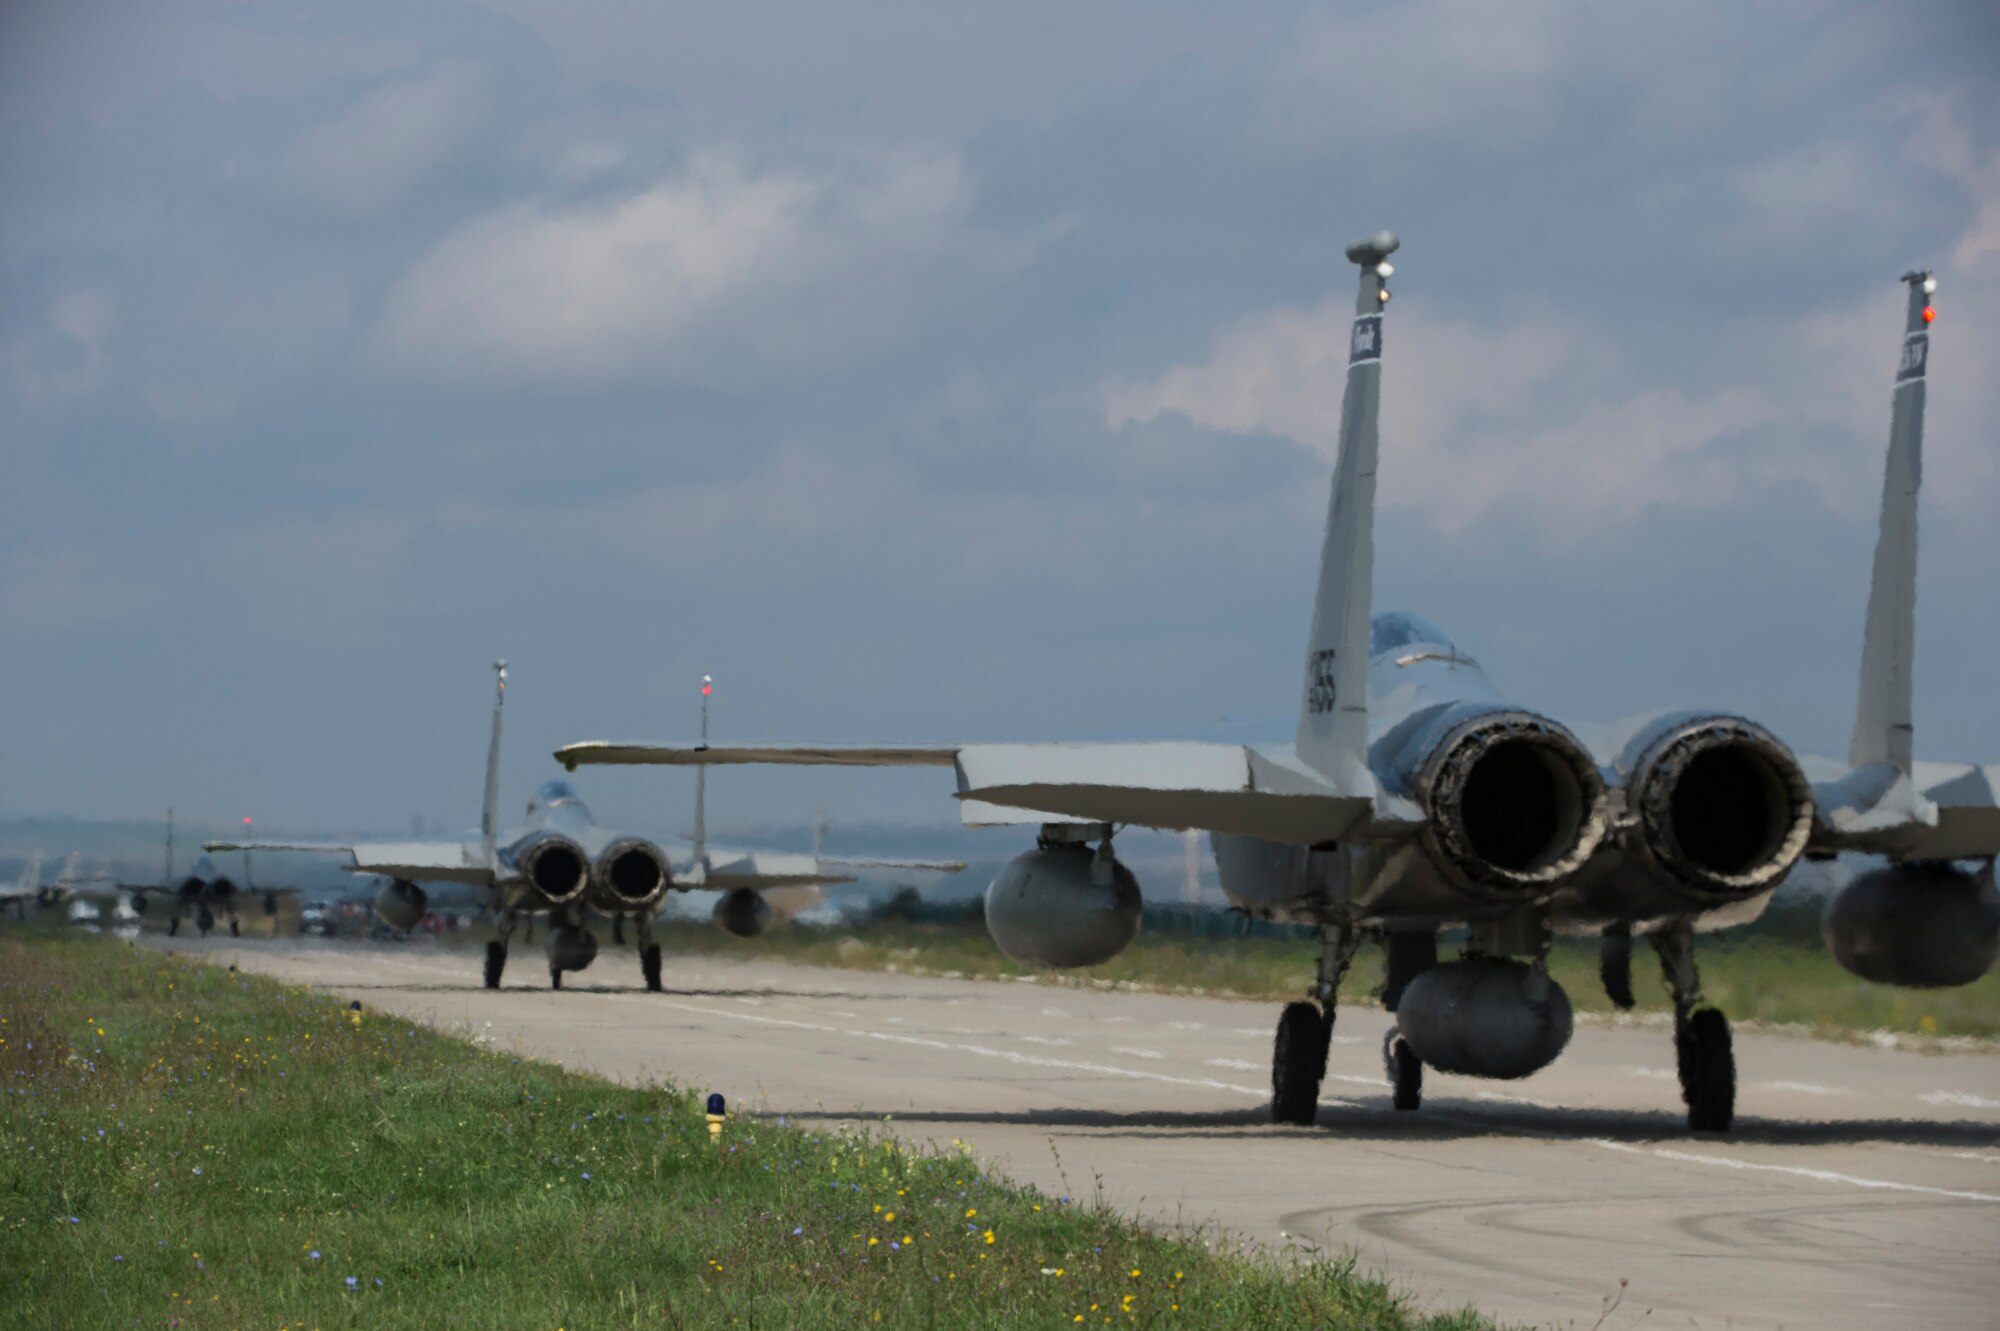 An F-15C Eagle fighter aircraft pilot assigned to the 123rd Expeditionary Fighter Squadron, 142nd Fighter Wing, Oregon Air National Guard, taxis during a theater security package deployment Sept. 25, 2015, at Campia Turzii, Romania. The U.S. and Romanian air forces conducted training aimed at strengthening interoperability and demonstrated the countries' shared commitment to the security and stability of Europe. (U.S. Air Force photo by Staff Sgt. Christopher Ruano/Released)